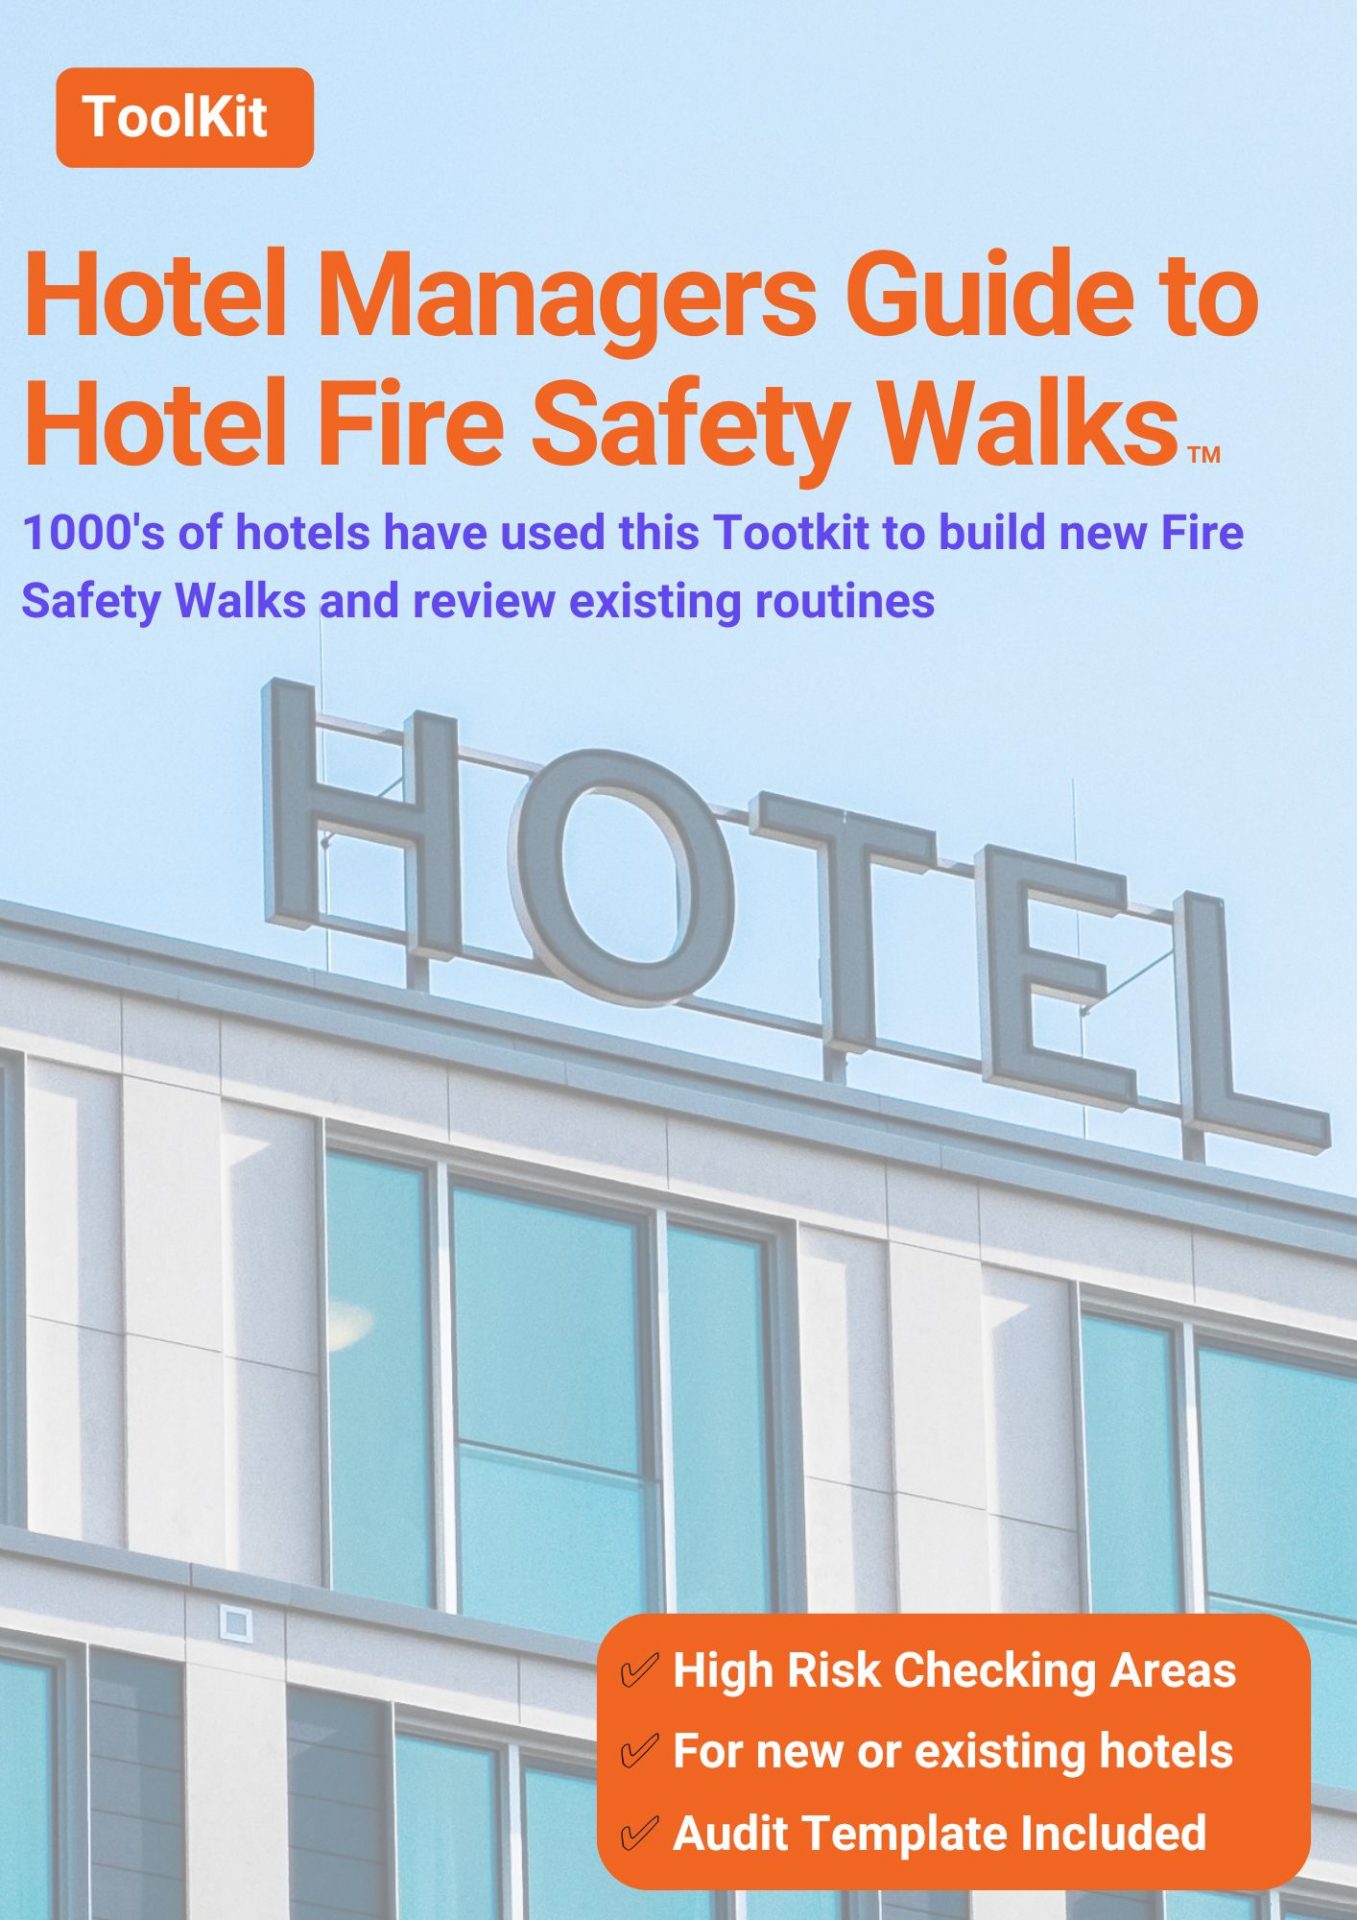 Hotel Managers Guide to Hotel Fire Safety Walks LM